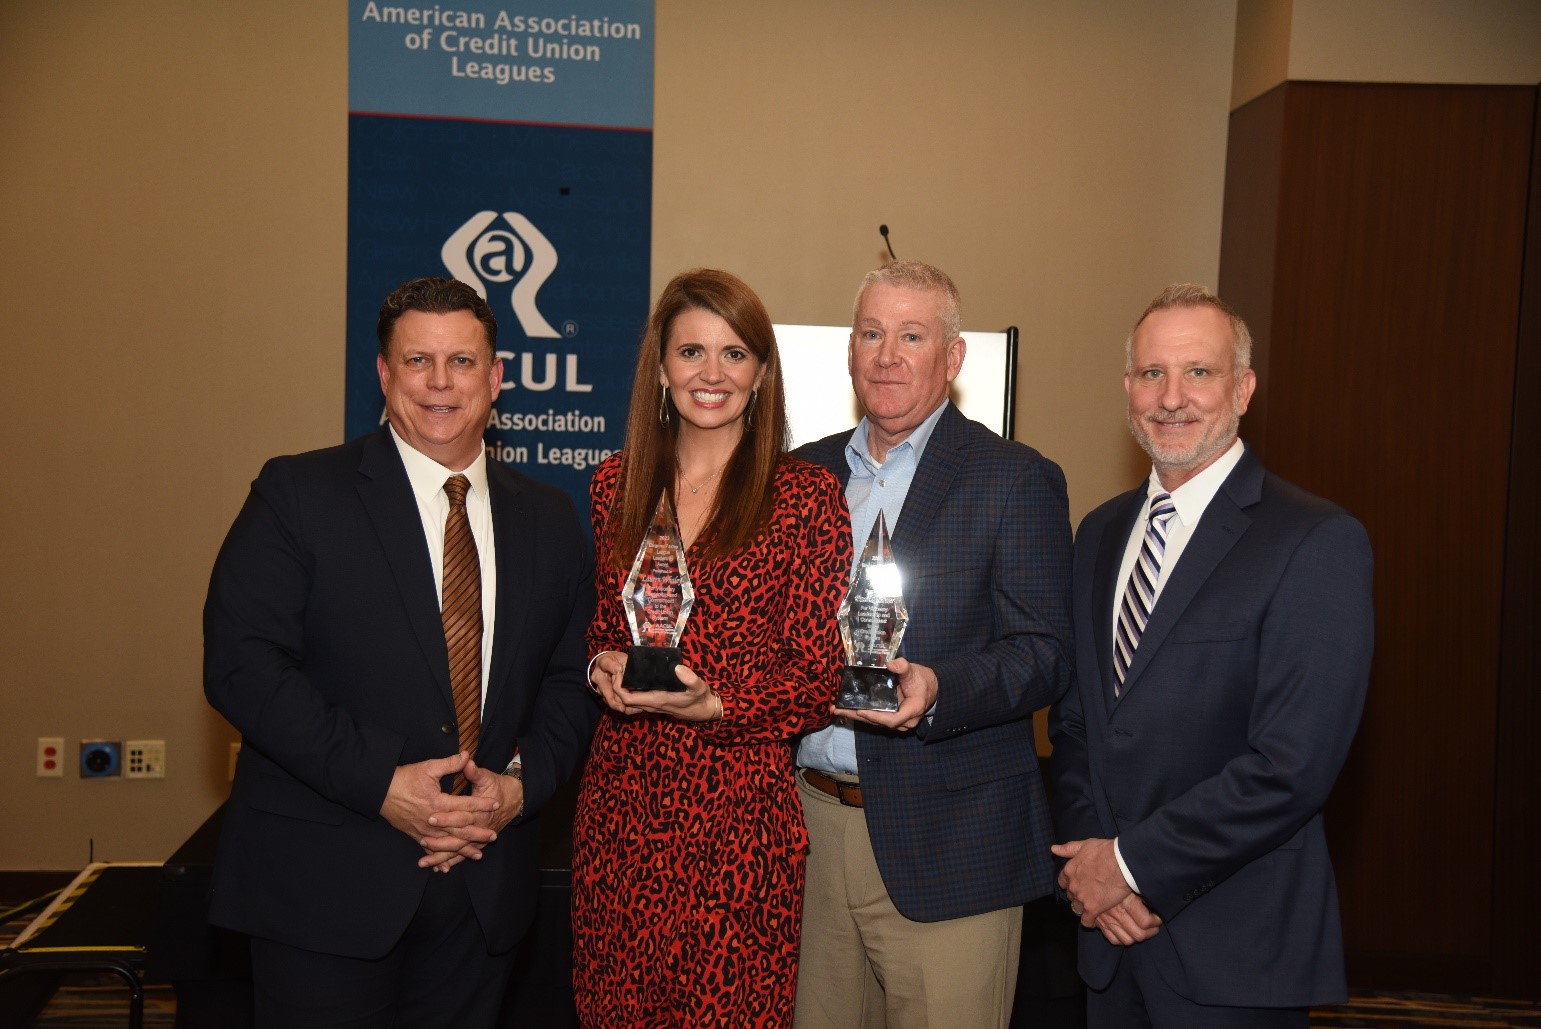 Lauren Whaley honored with AACUL’s Farley Award